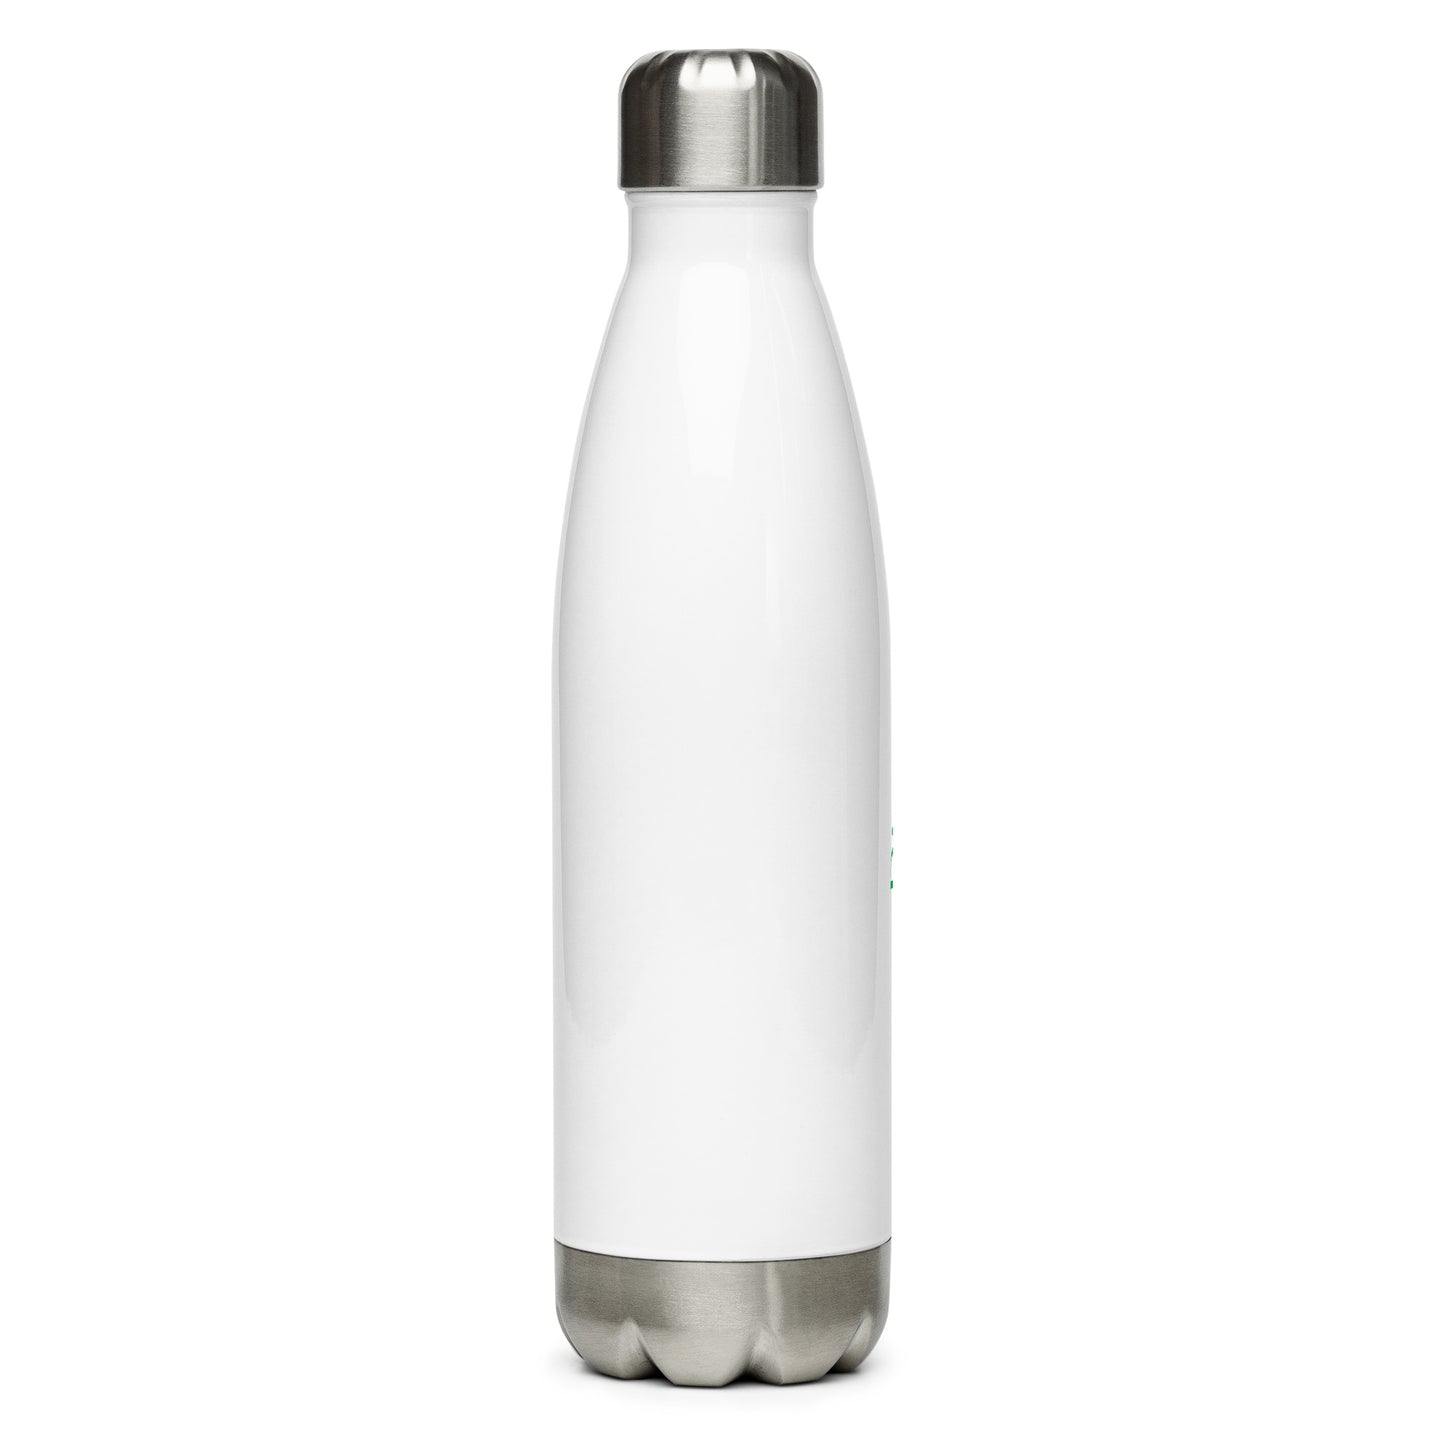 Pickle-icious Jingle Jam Stainless Steel Water Bottle